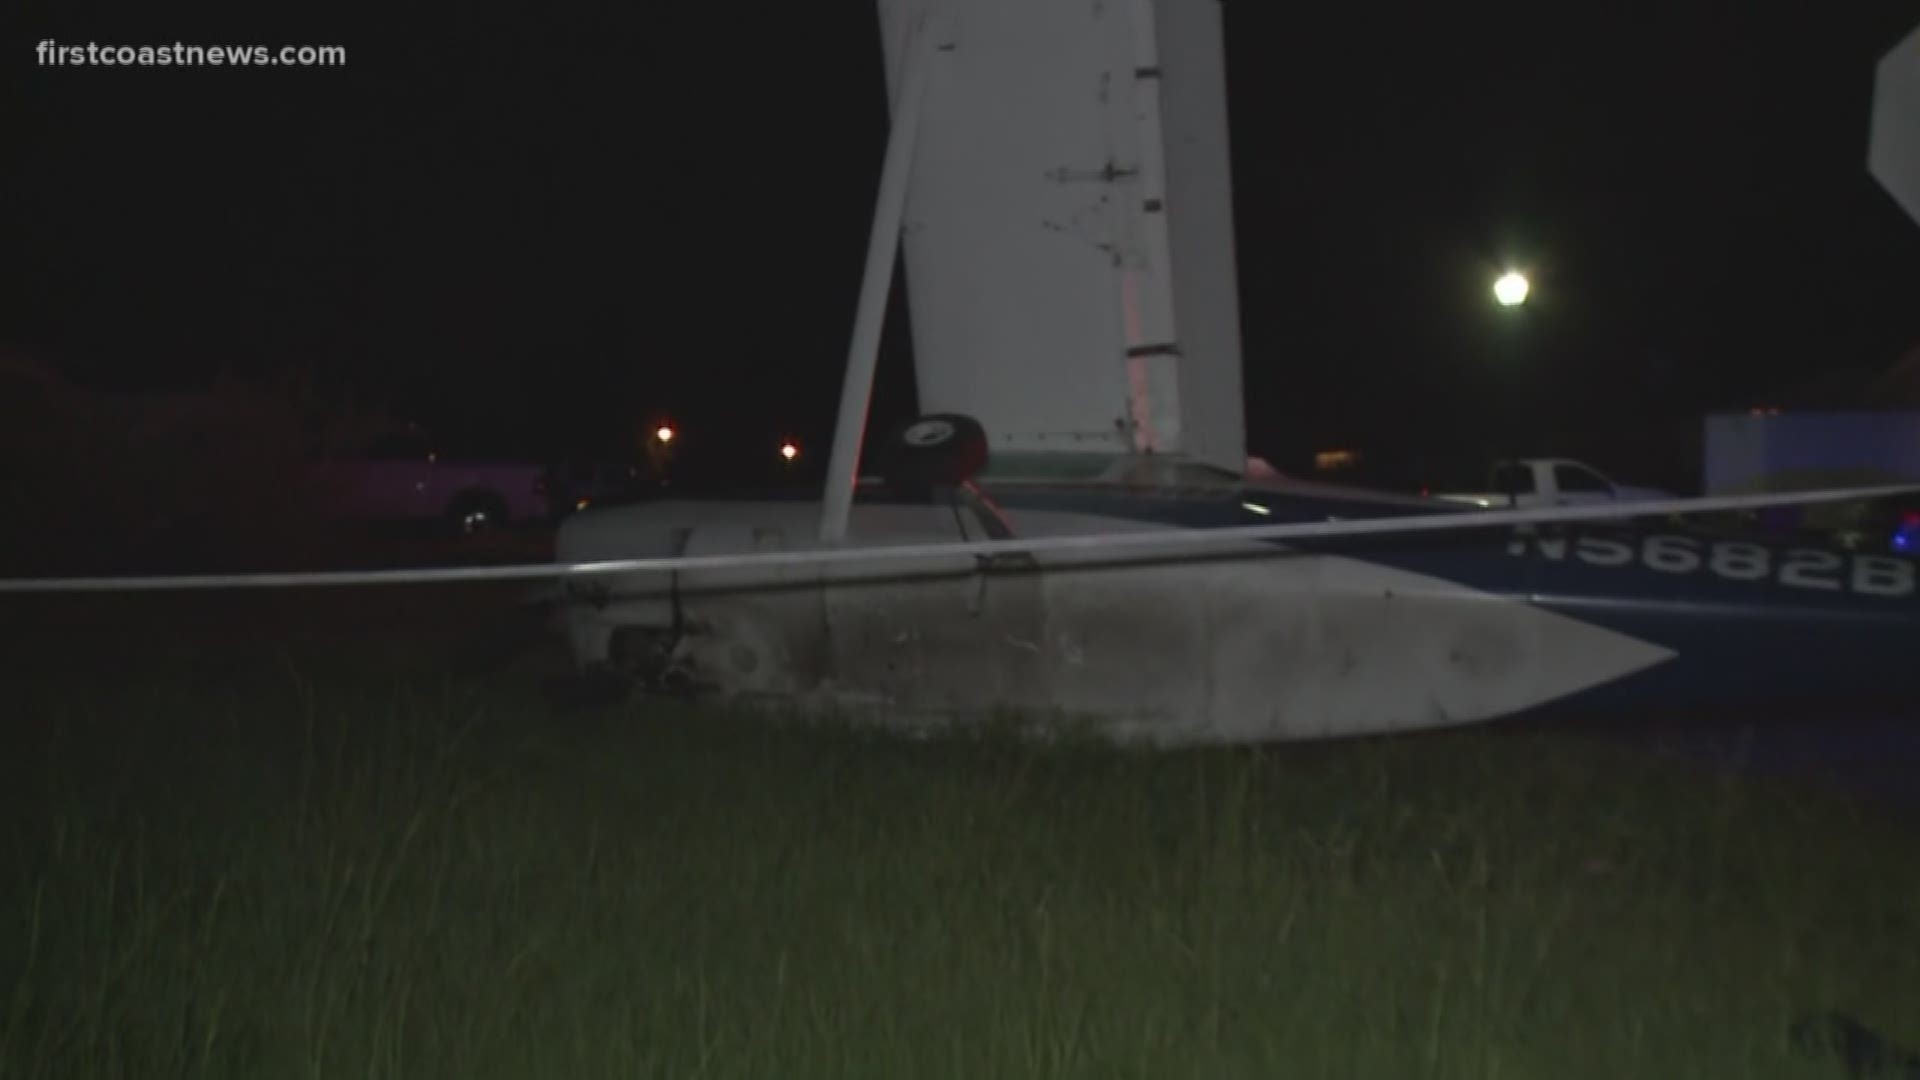 FCN's Lana Harris has the latest information on a plane crash that occurred Saturday on the Westside.